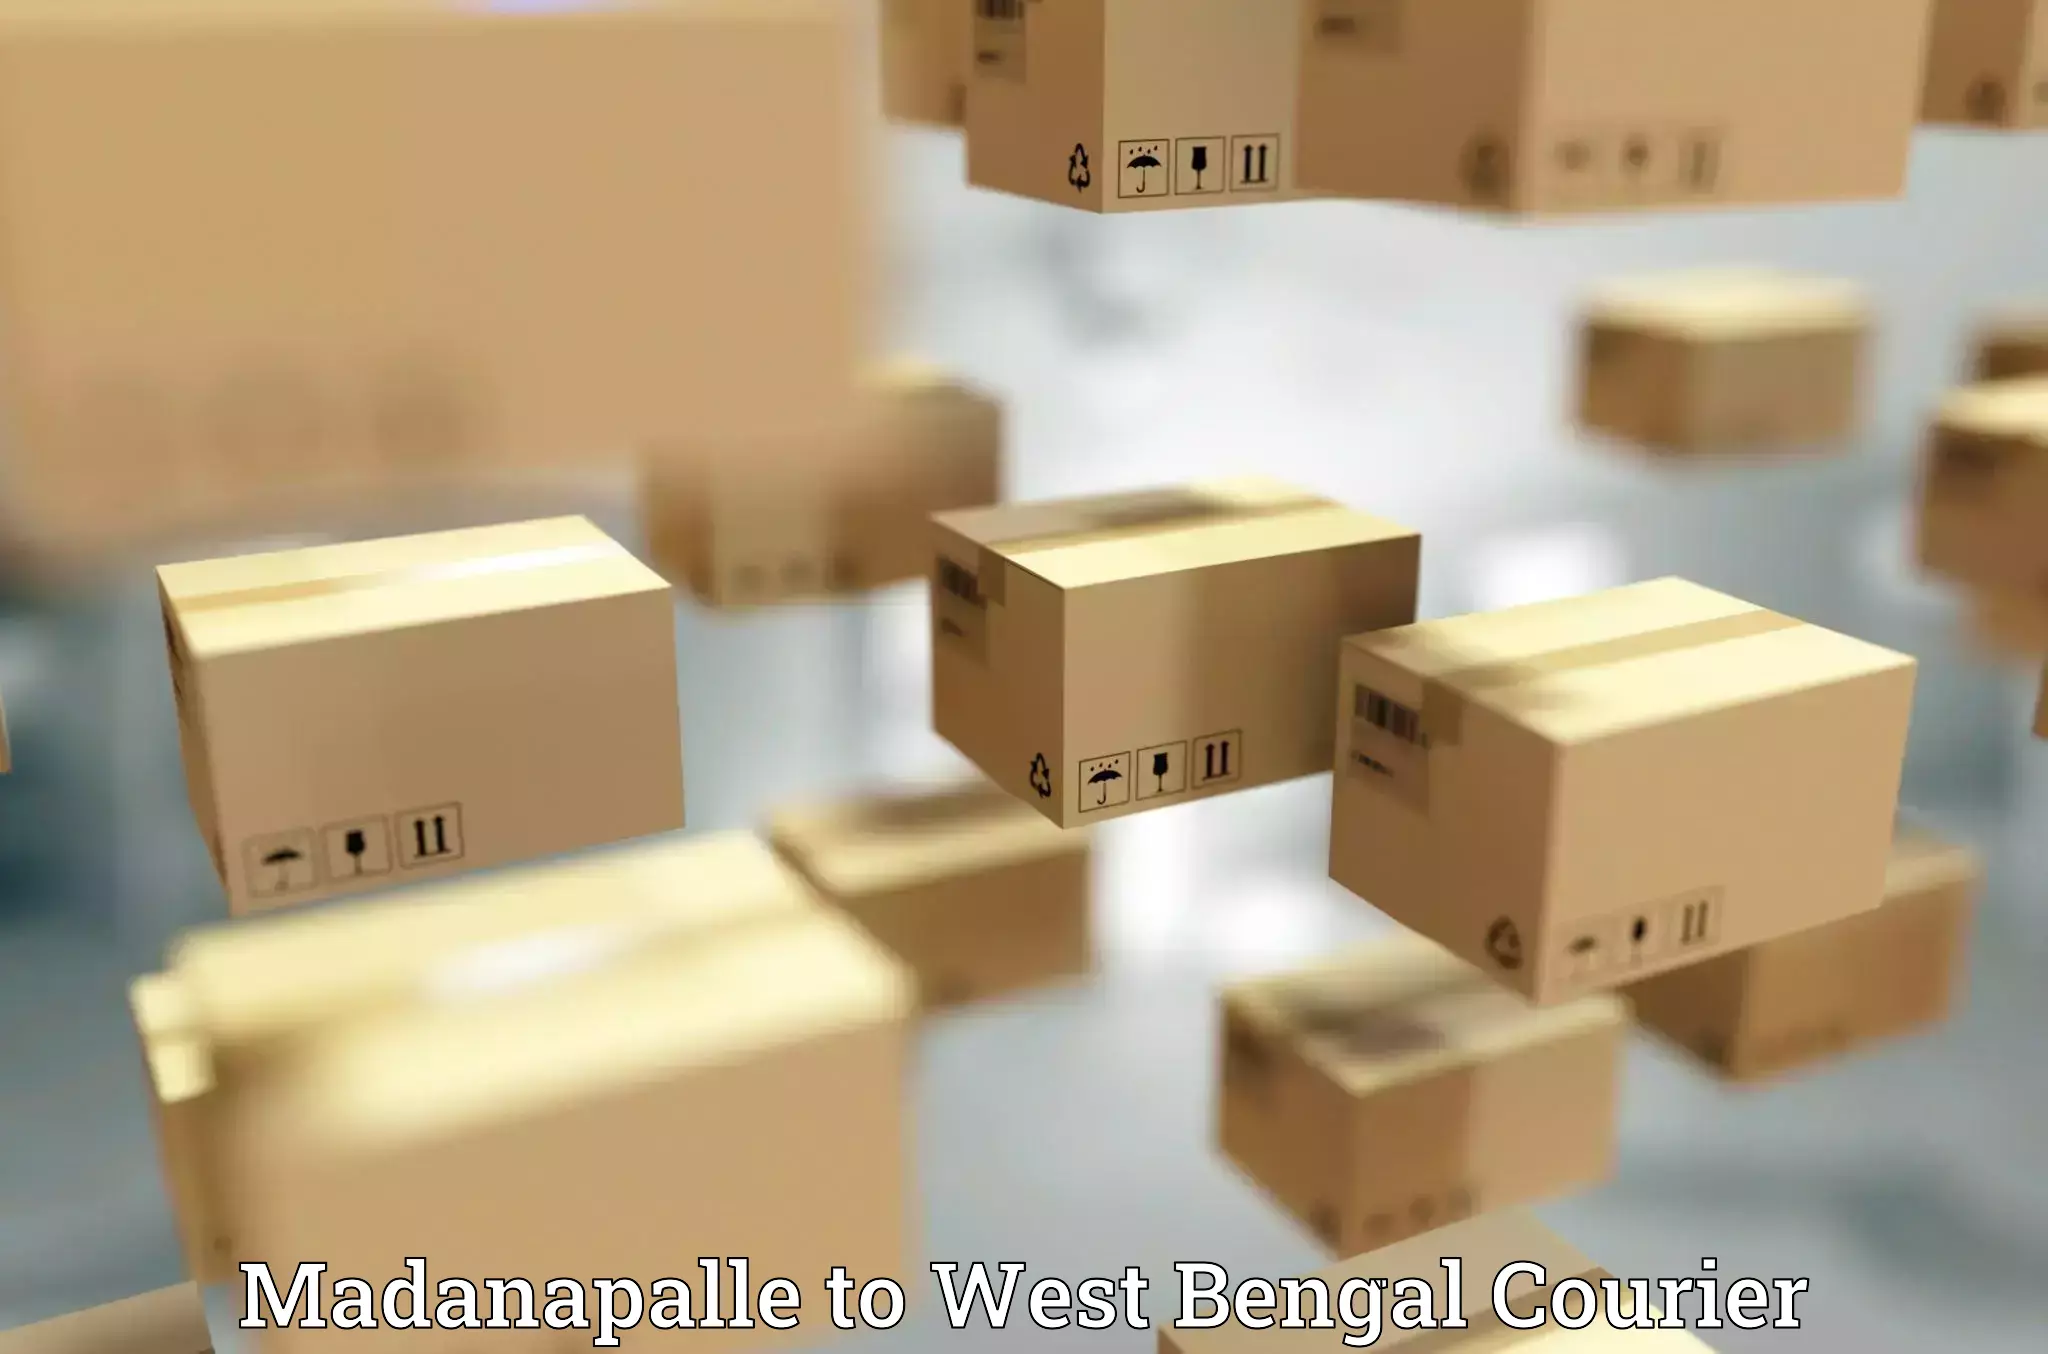 Subscription-based courier Madanapalle to West Bengal